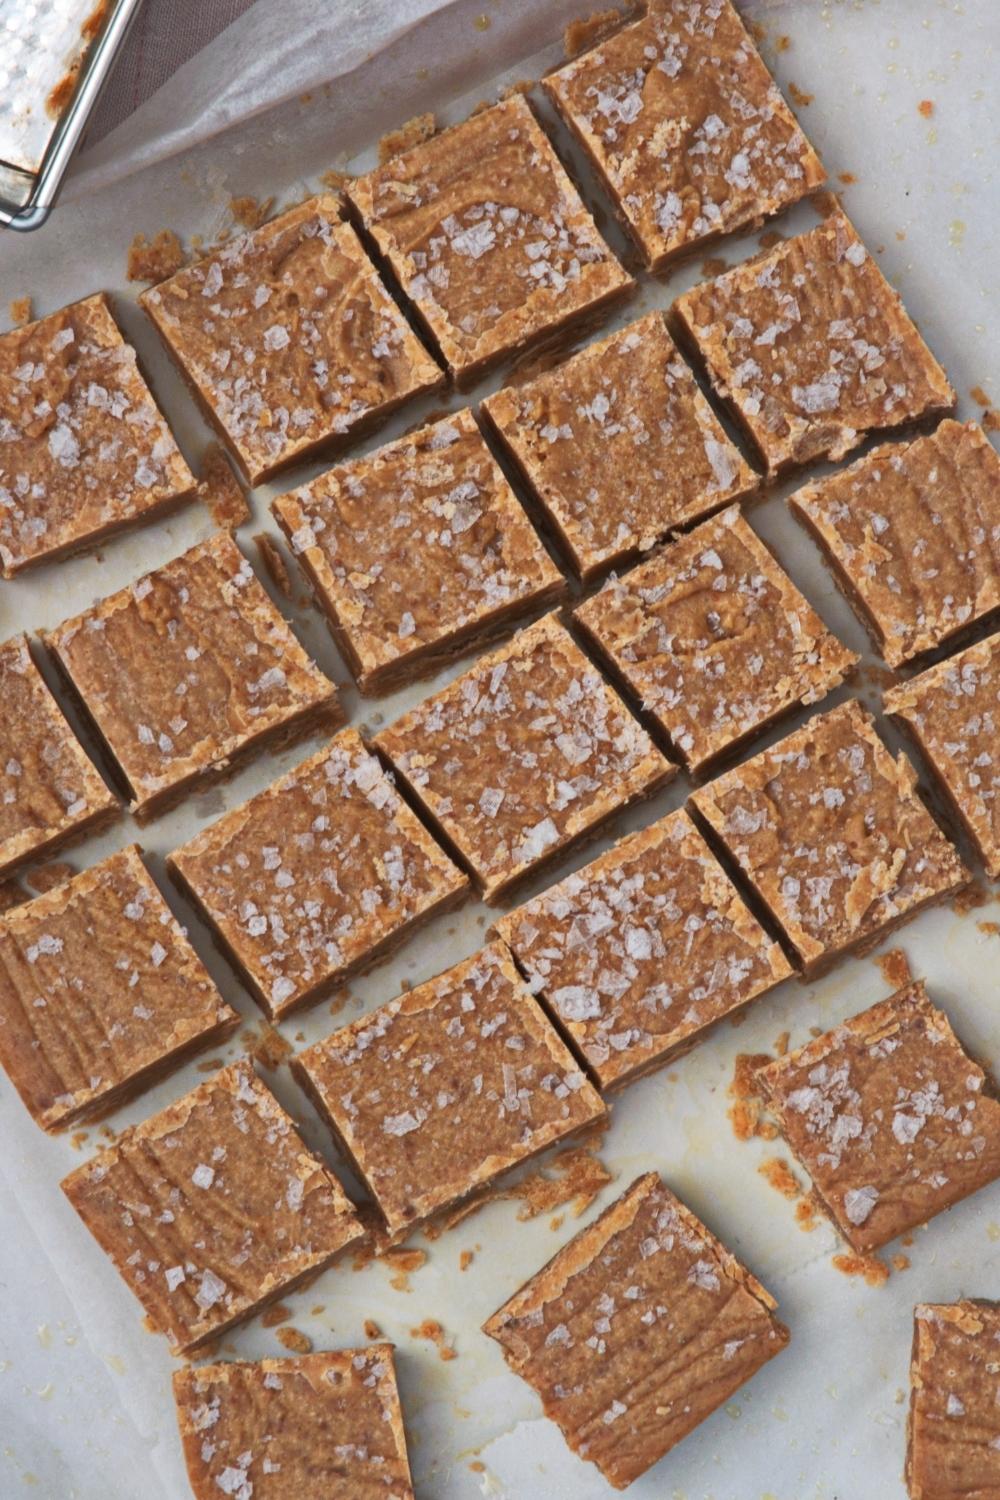 An overhead view of a square shape of caramel fudge that is cut into many small squares.